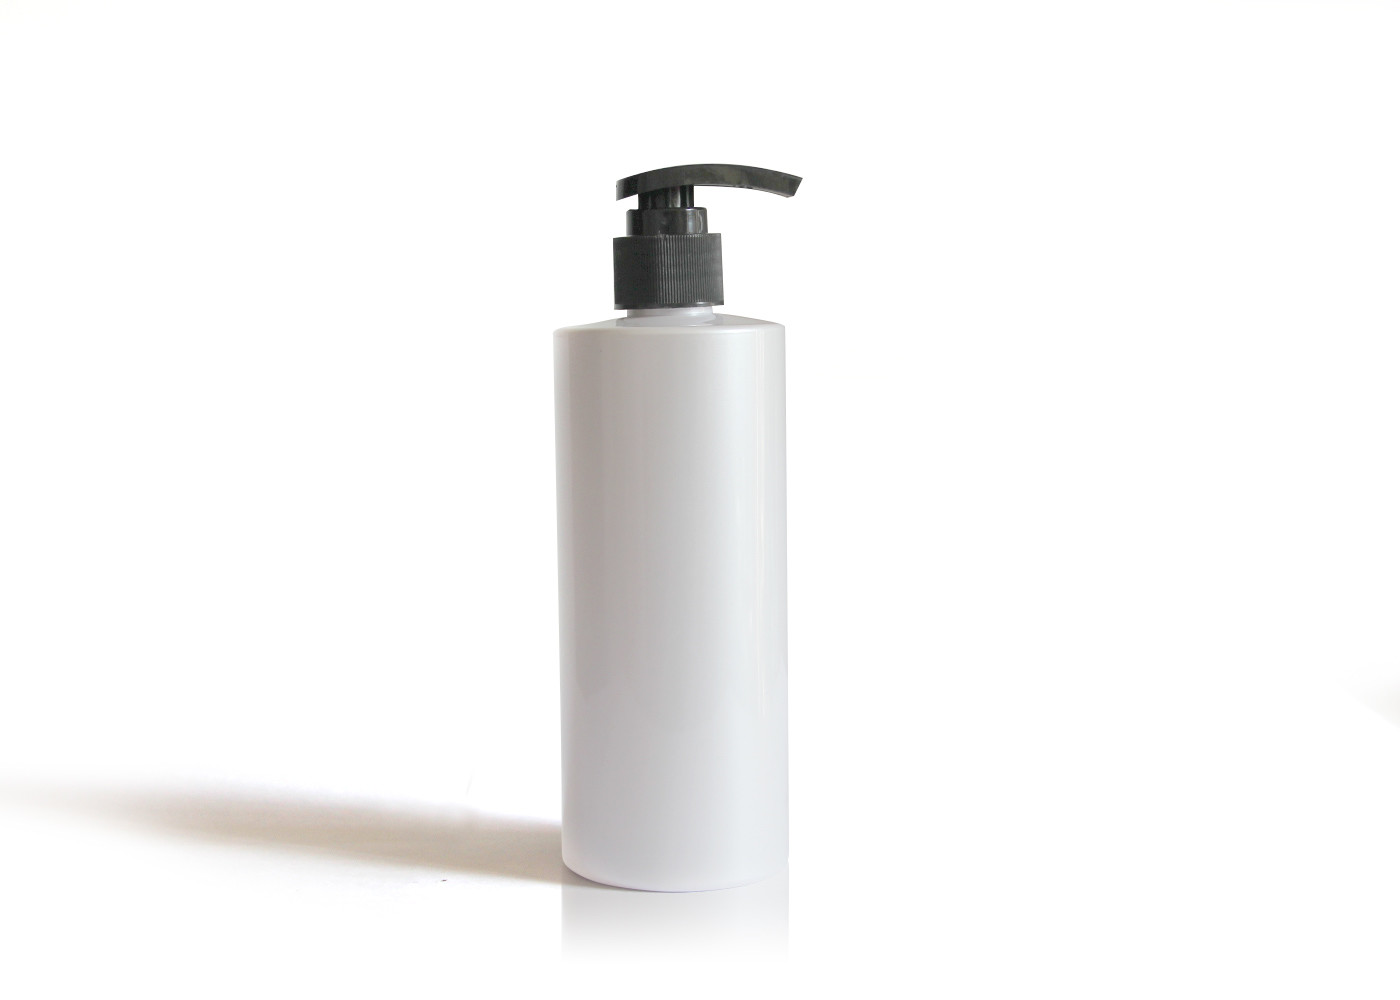 White Cylinder PET Cosmetic Bottles With Black Plastic Pump Dispenser